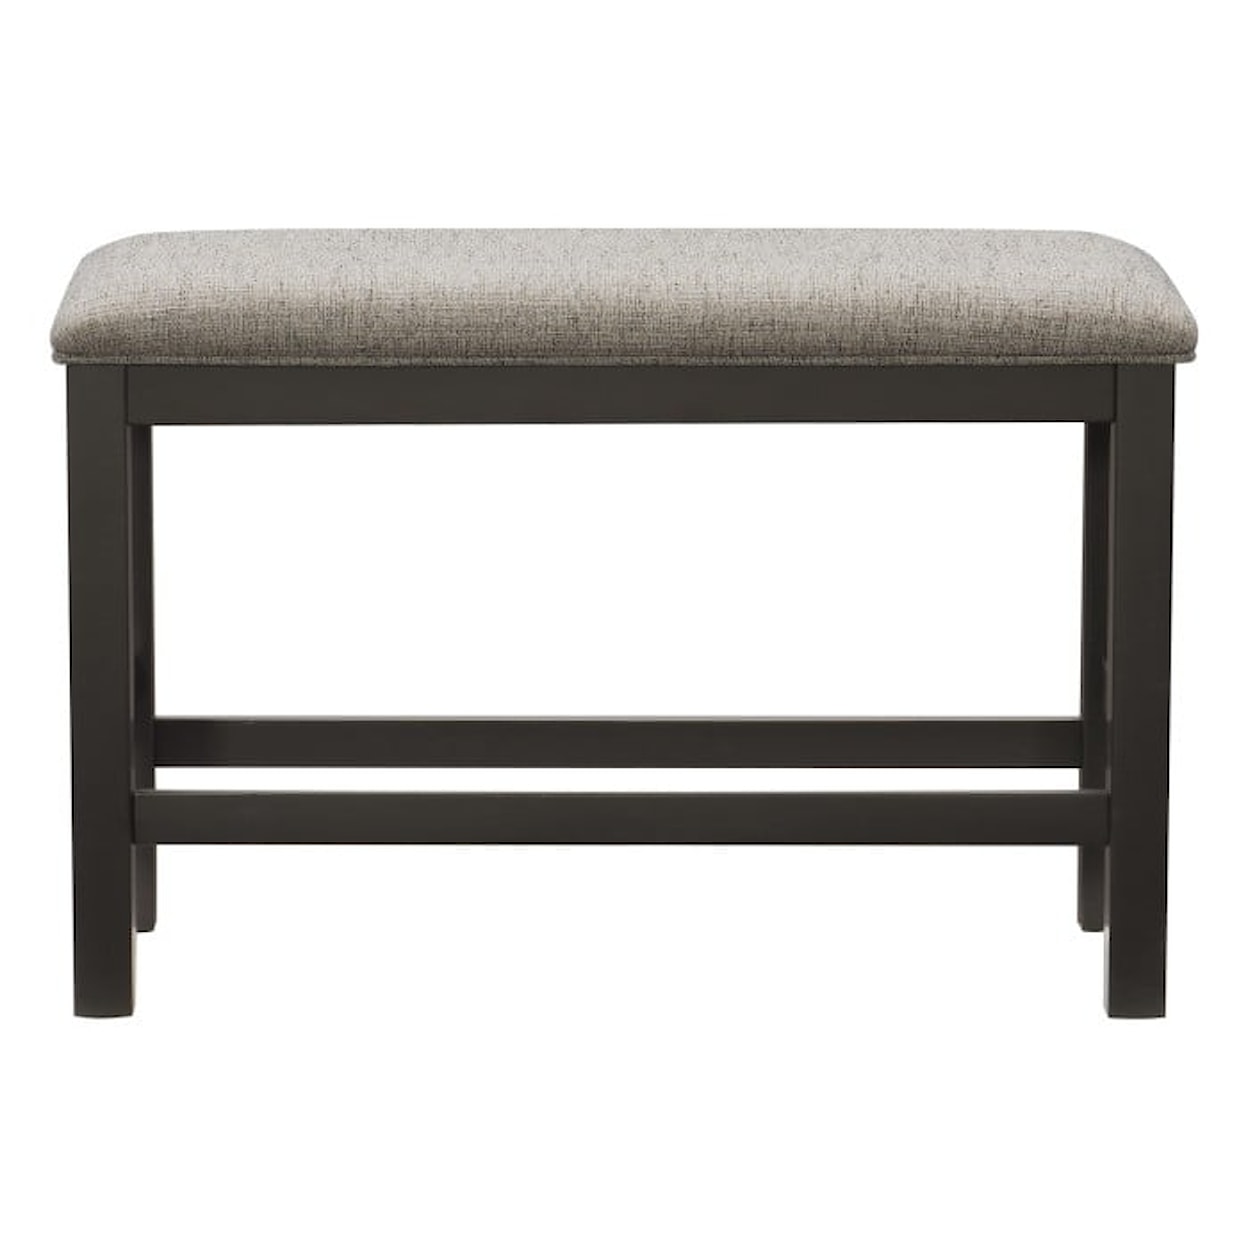 Homelegance Furniture Elias Counter Height Bench